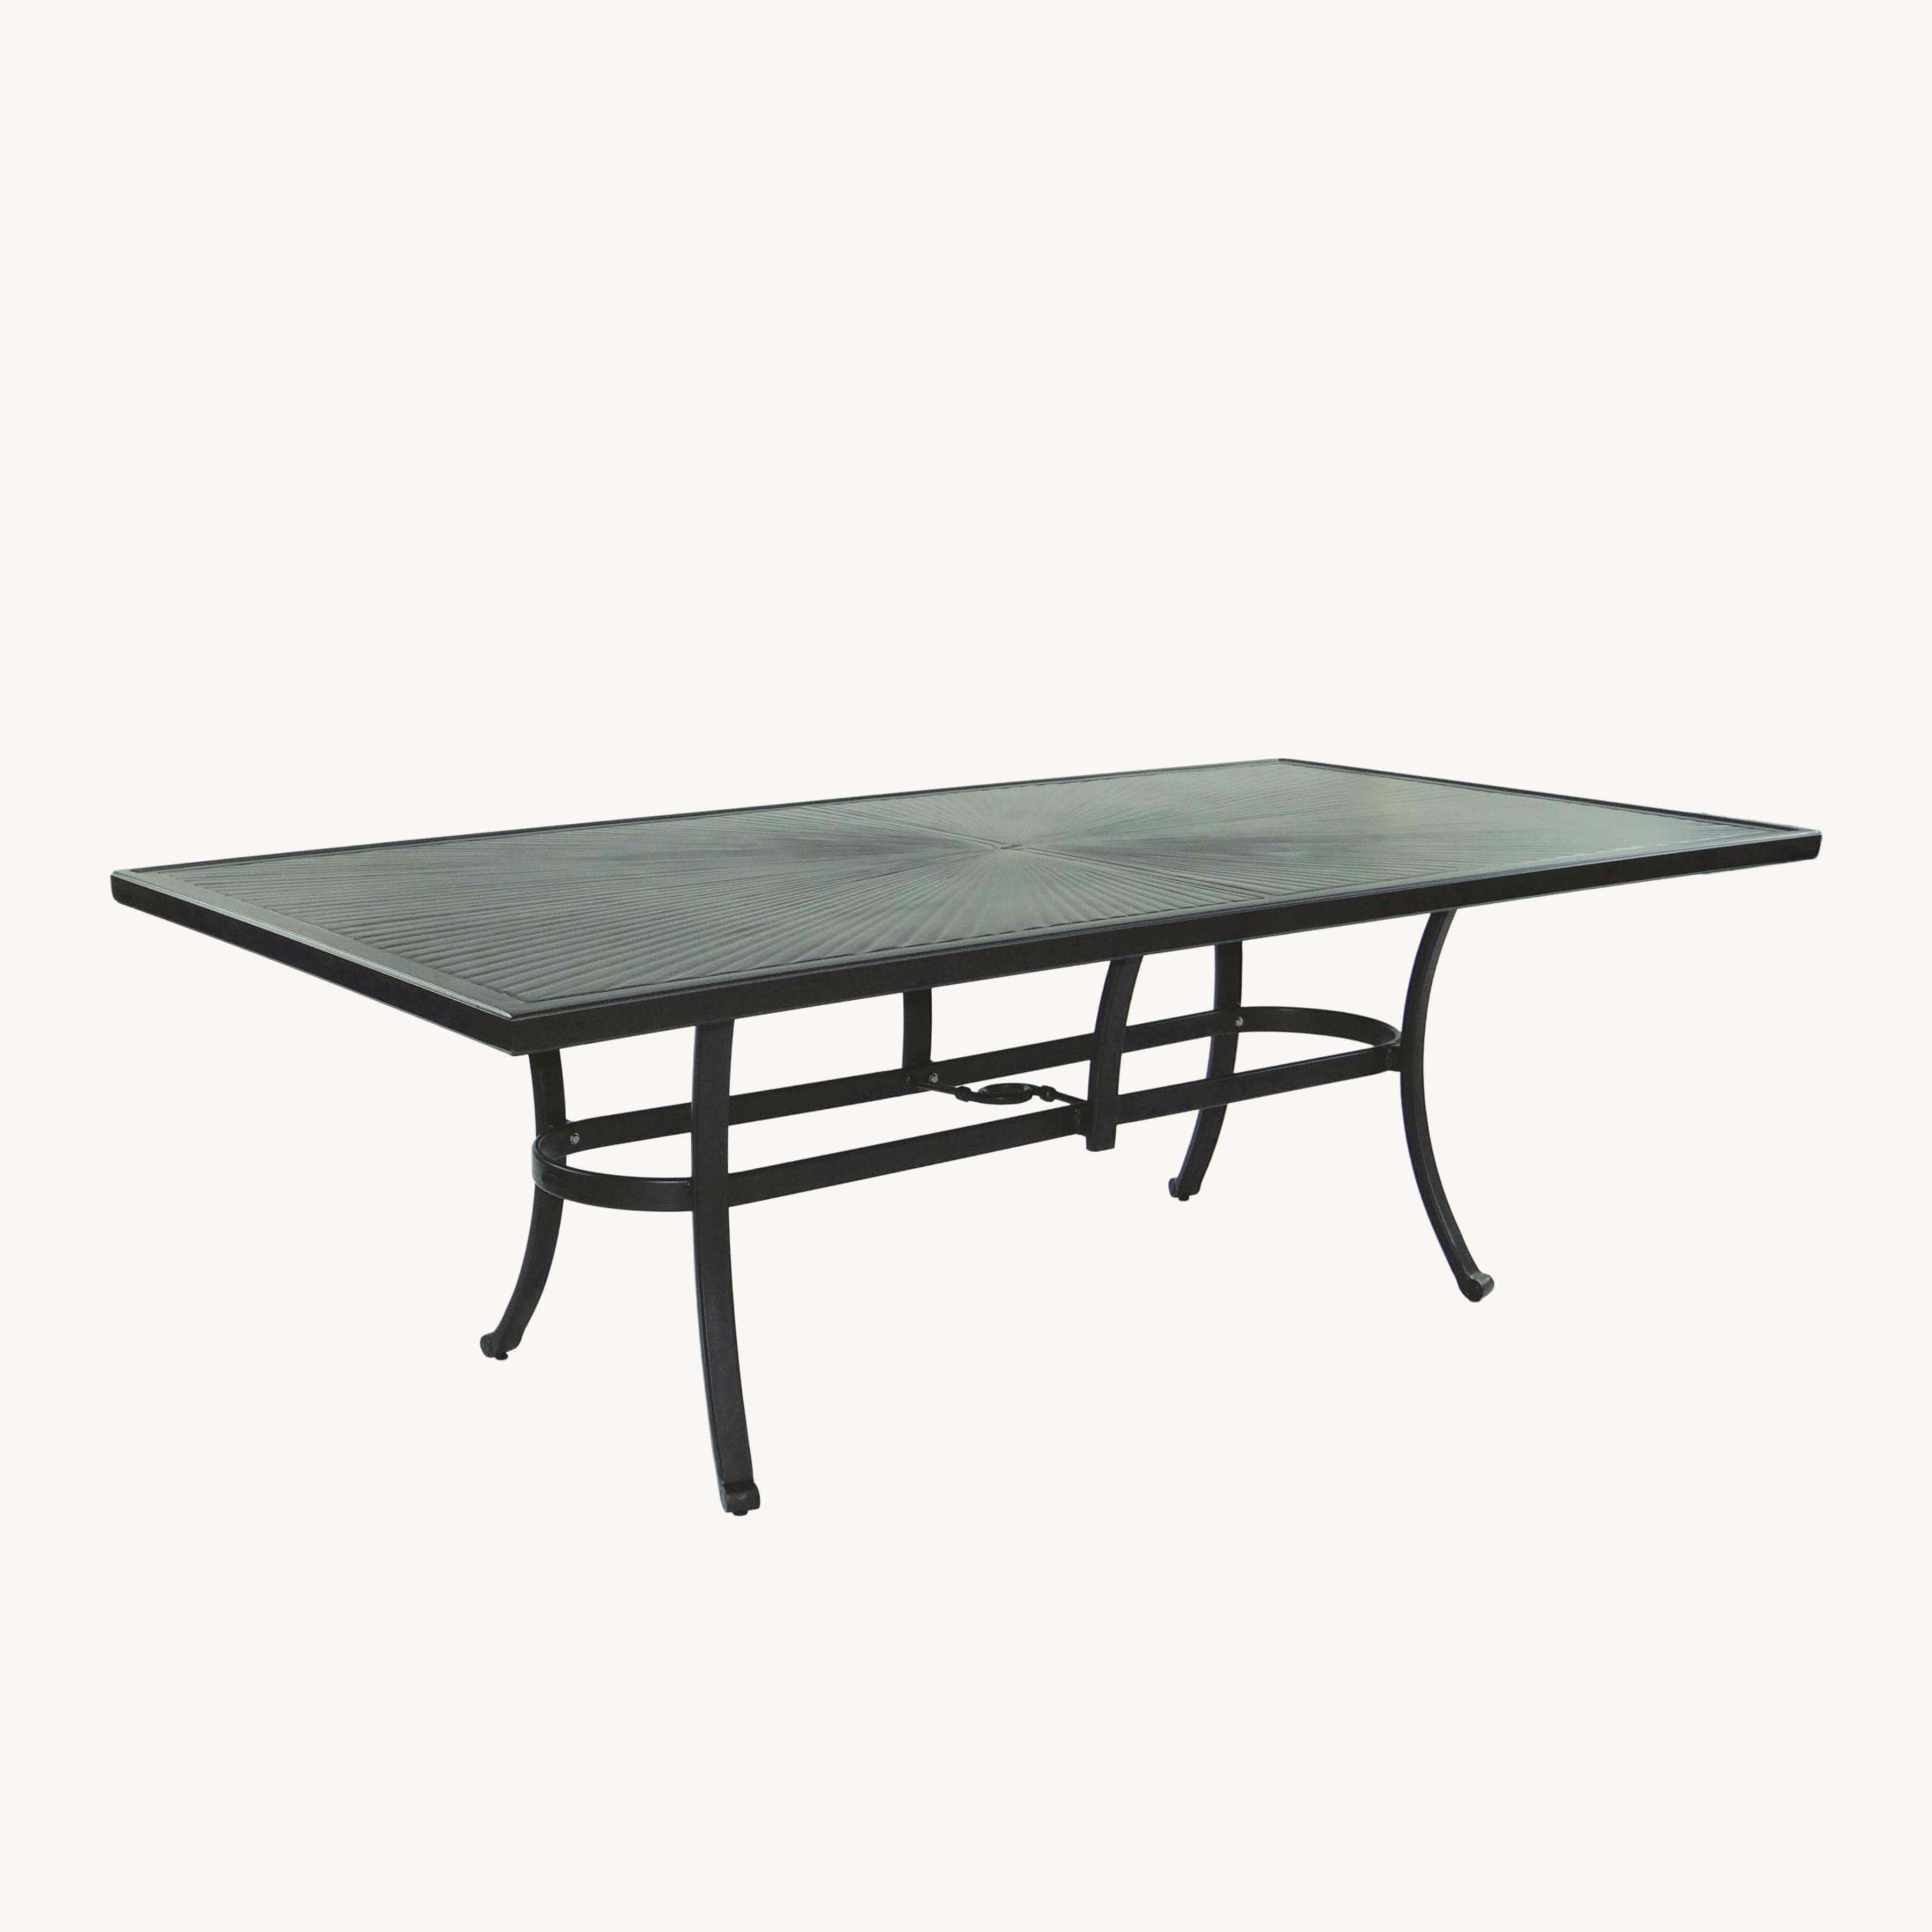 Vintage 84" Rectangular Dining Table By Castelle